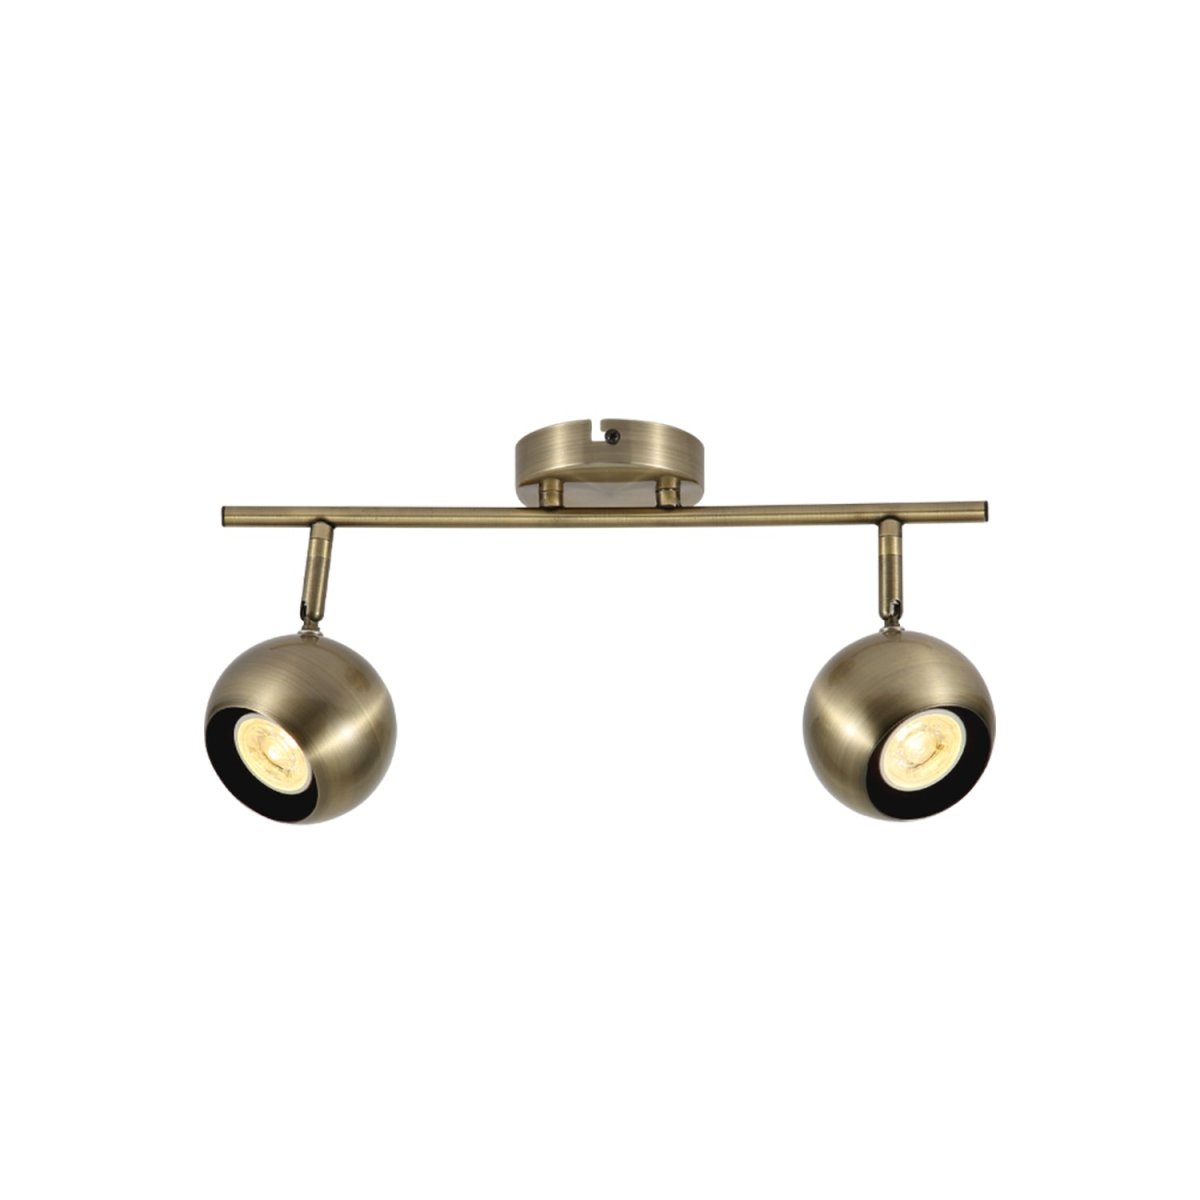 Main image of 2 Way Sphere Rod Spotlight with GU10 Fitting Antique Brass | TEKLED 172-03120